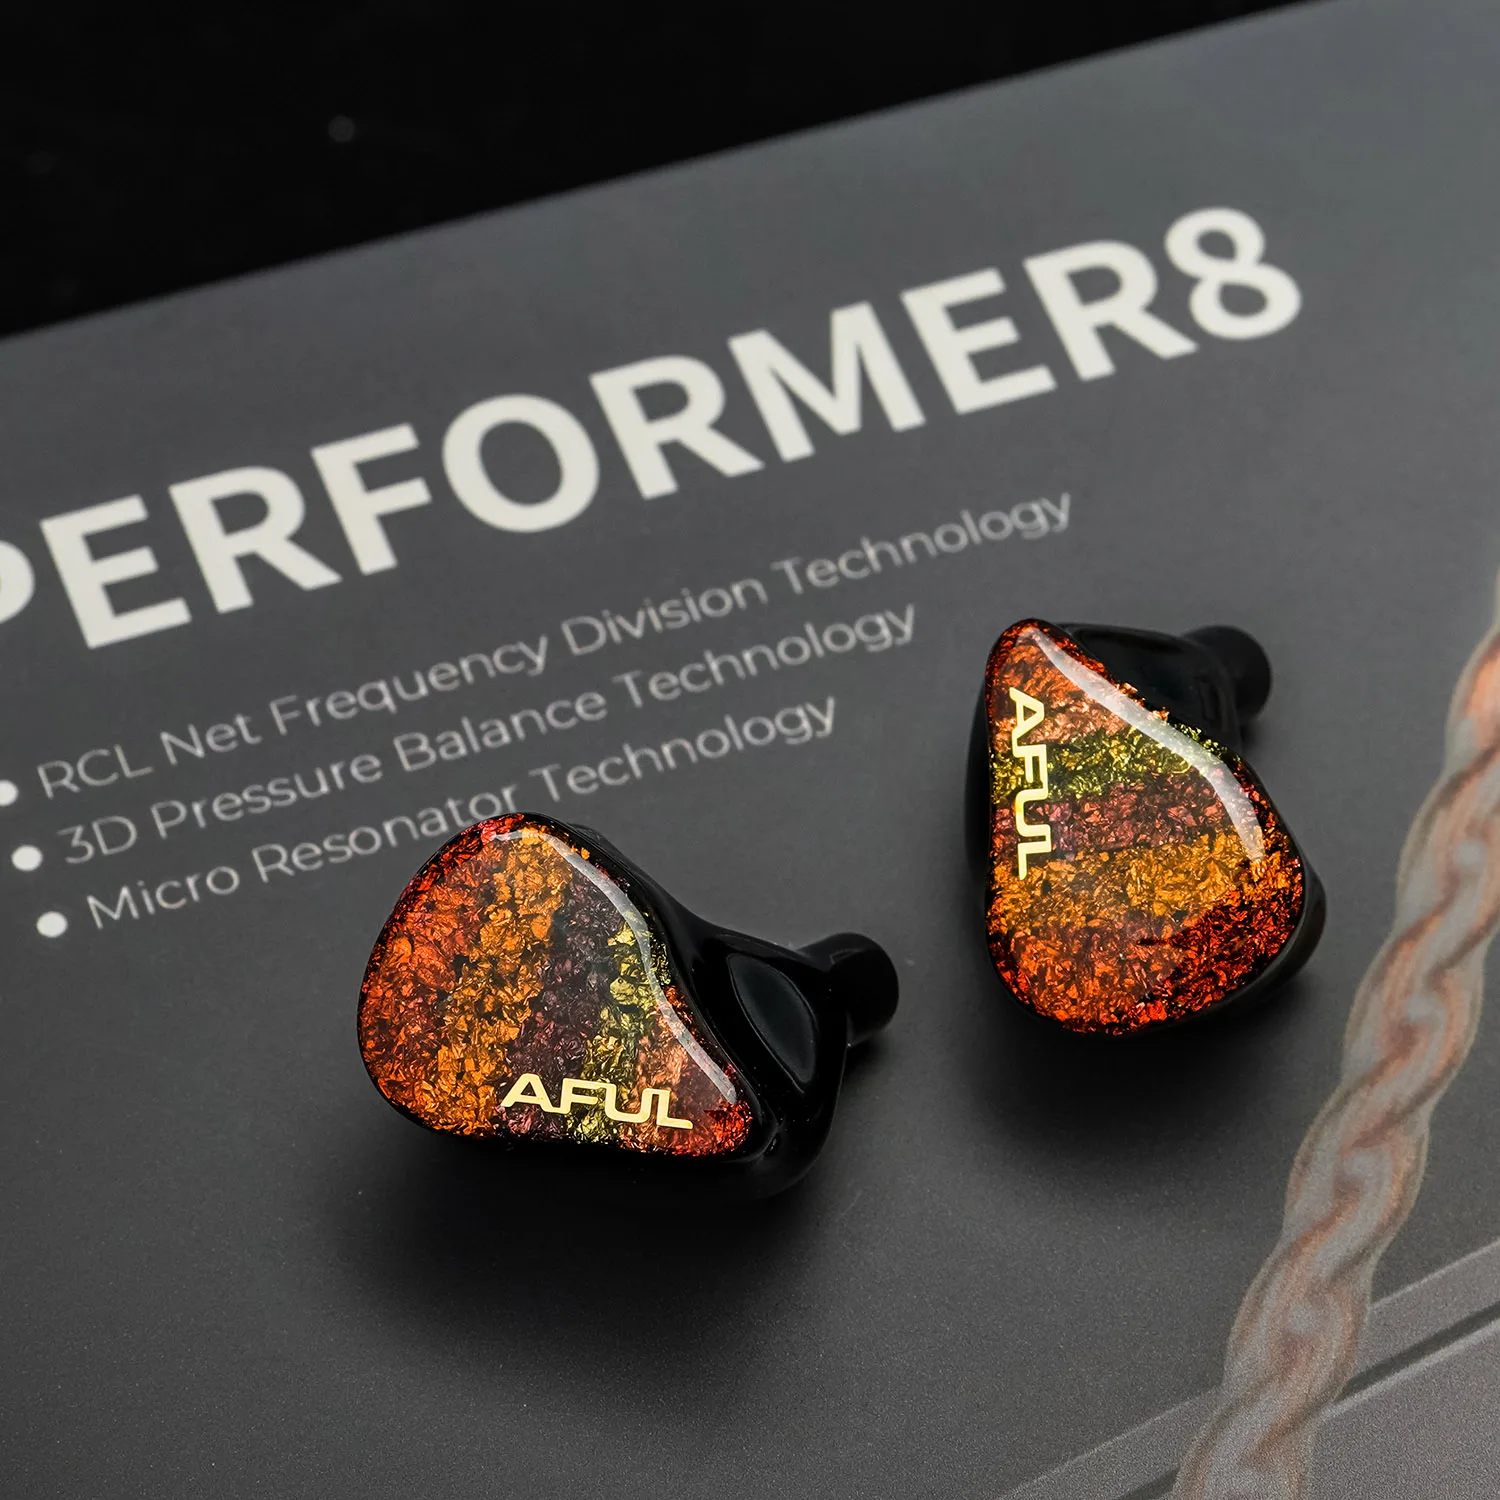 AFUL Performer 8 IEM Review